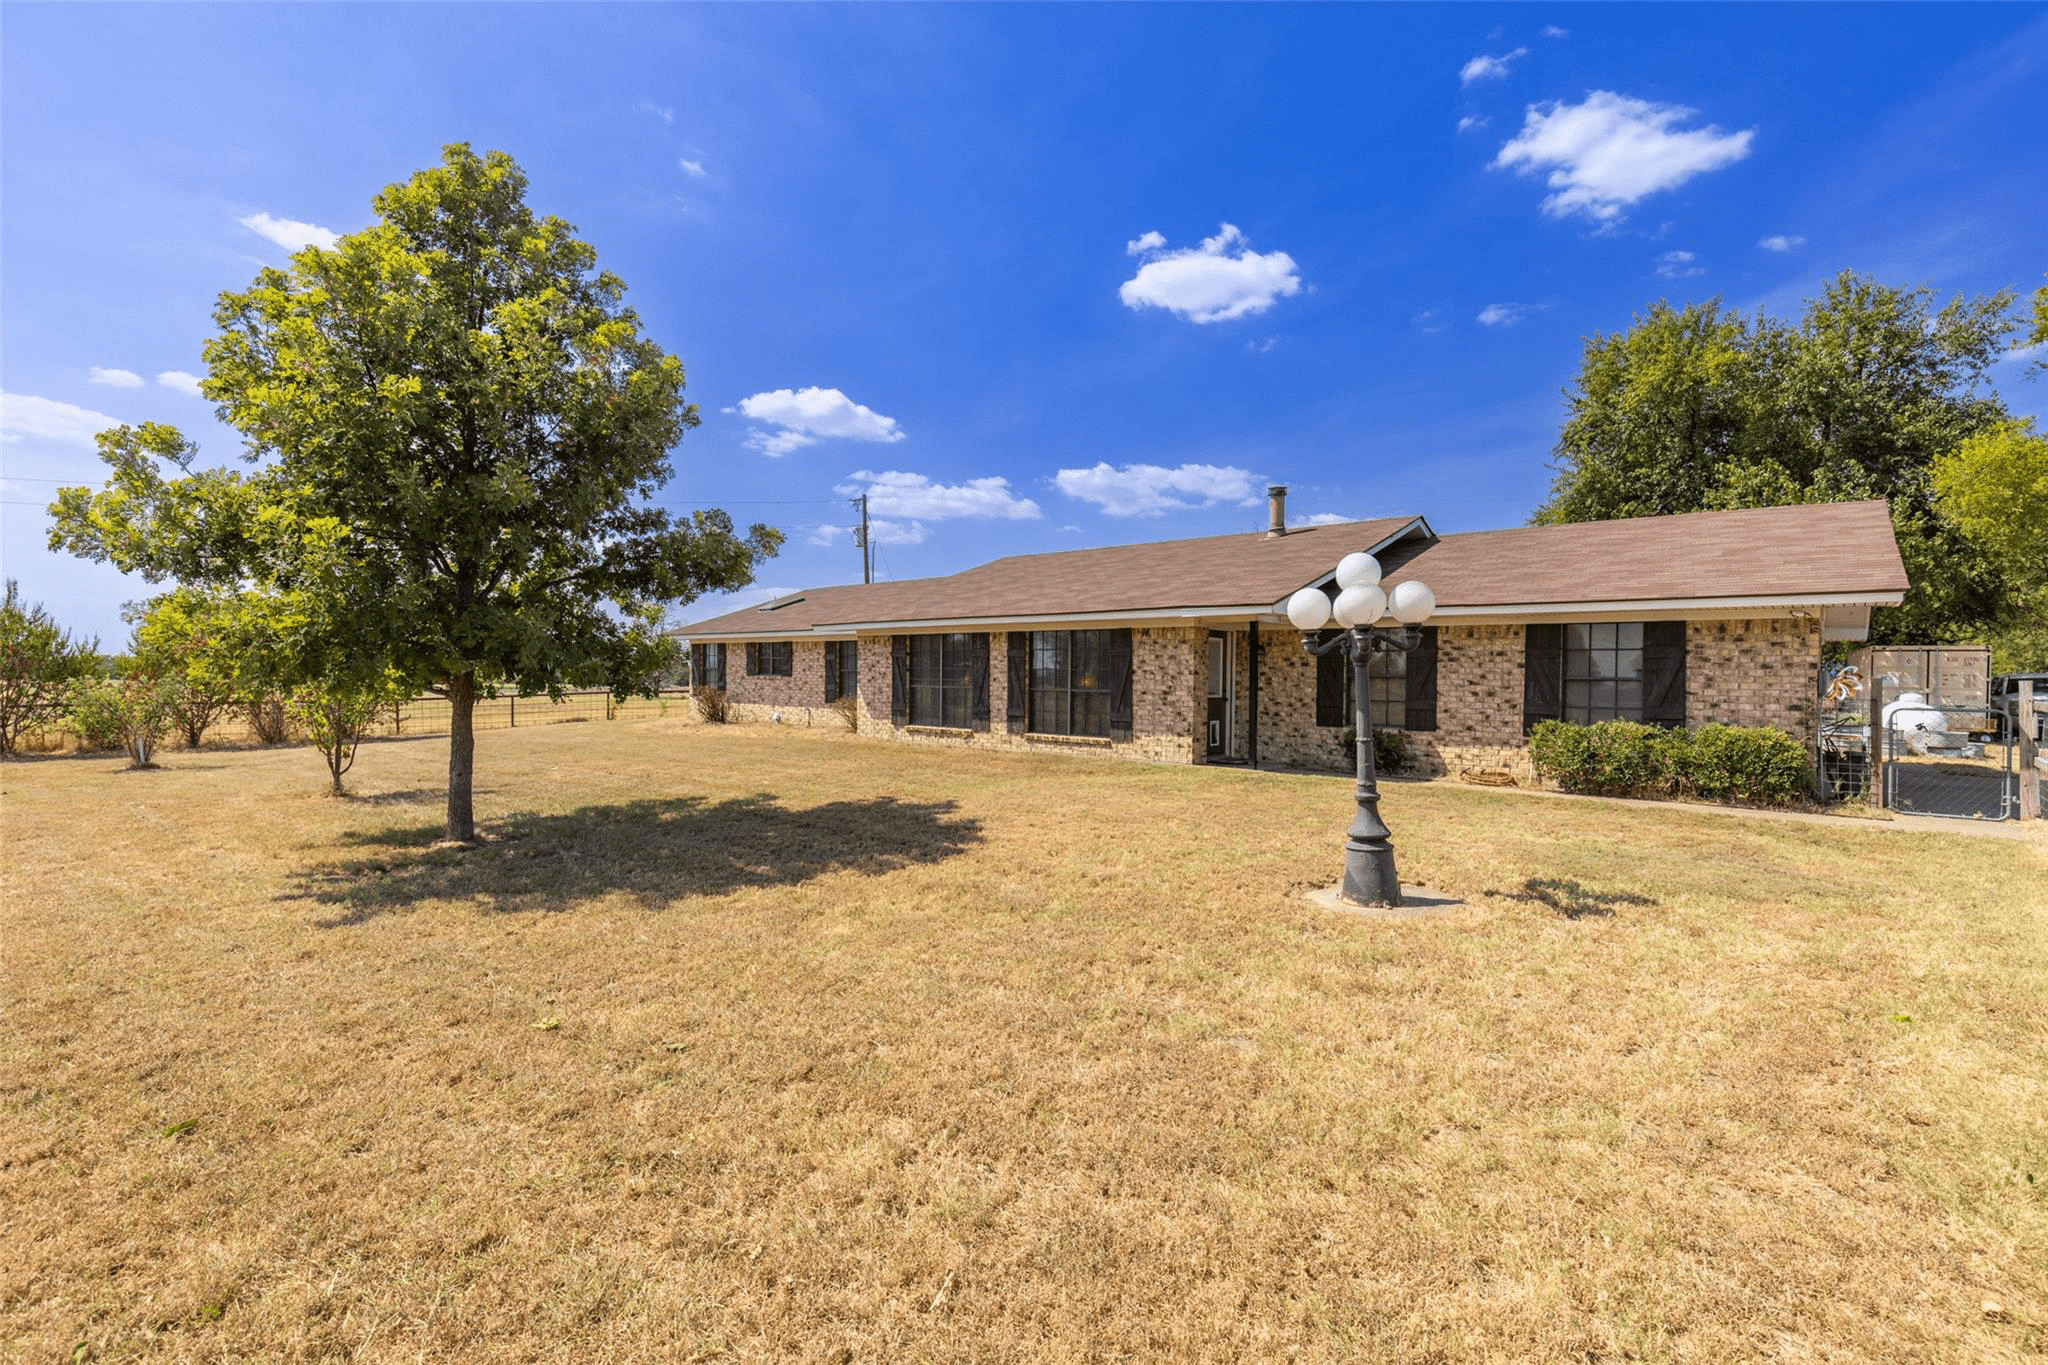 Hopkins County Farm on 49 Acres with Brick House & Barn Just Arrived on the Market